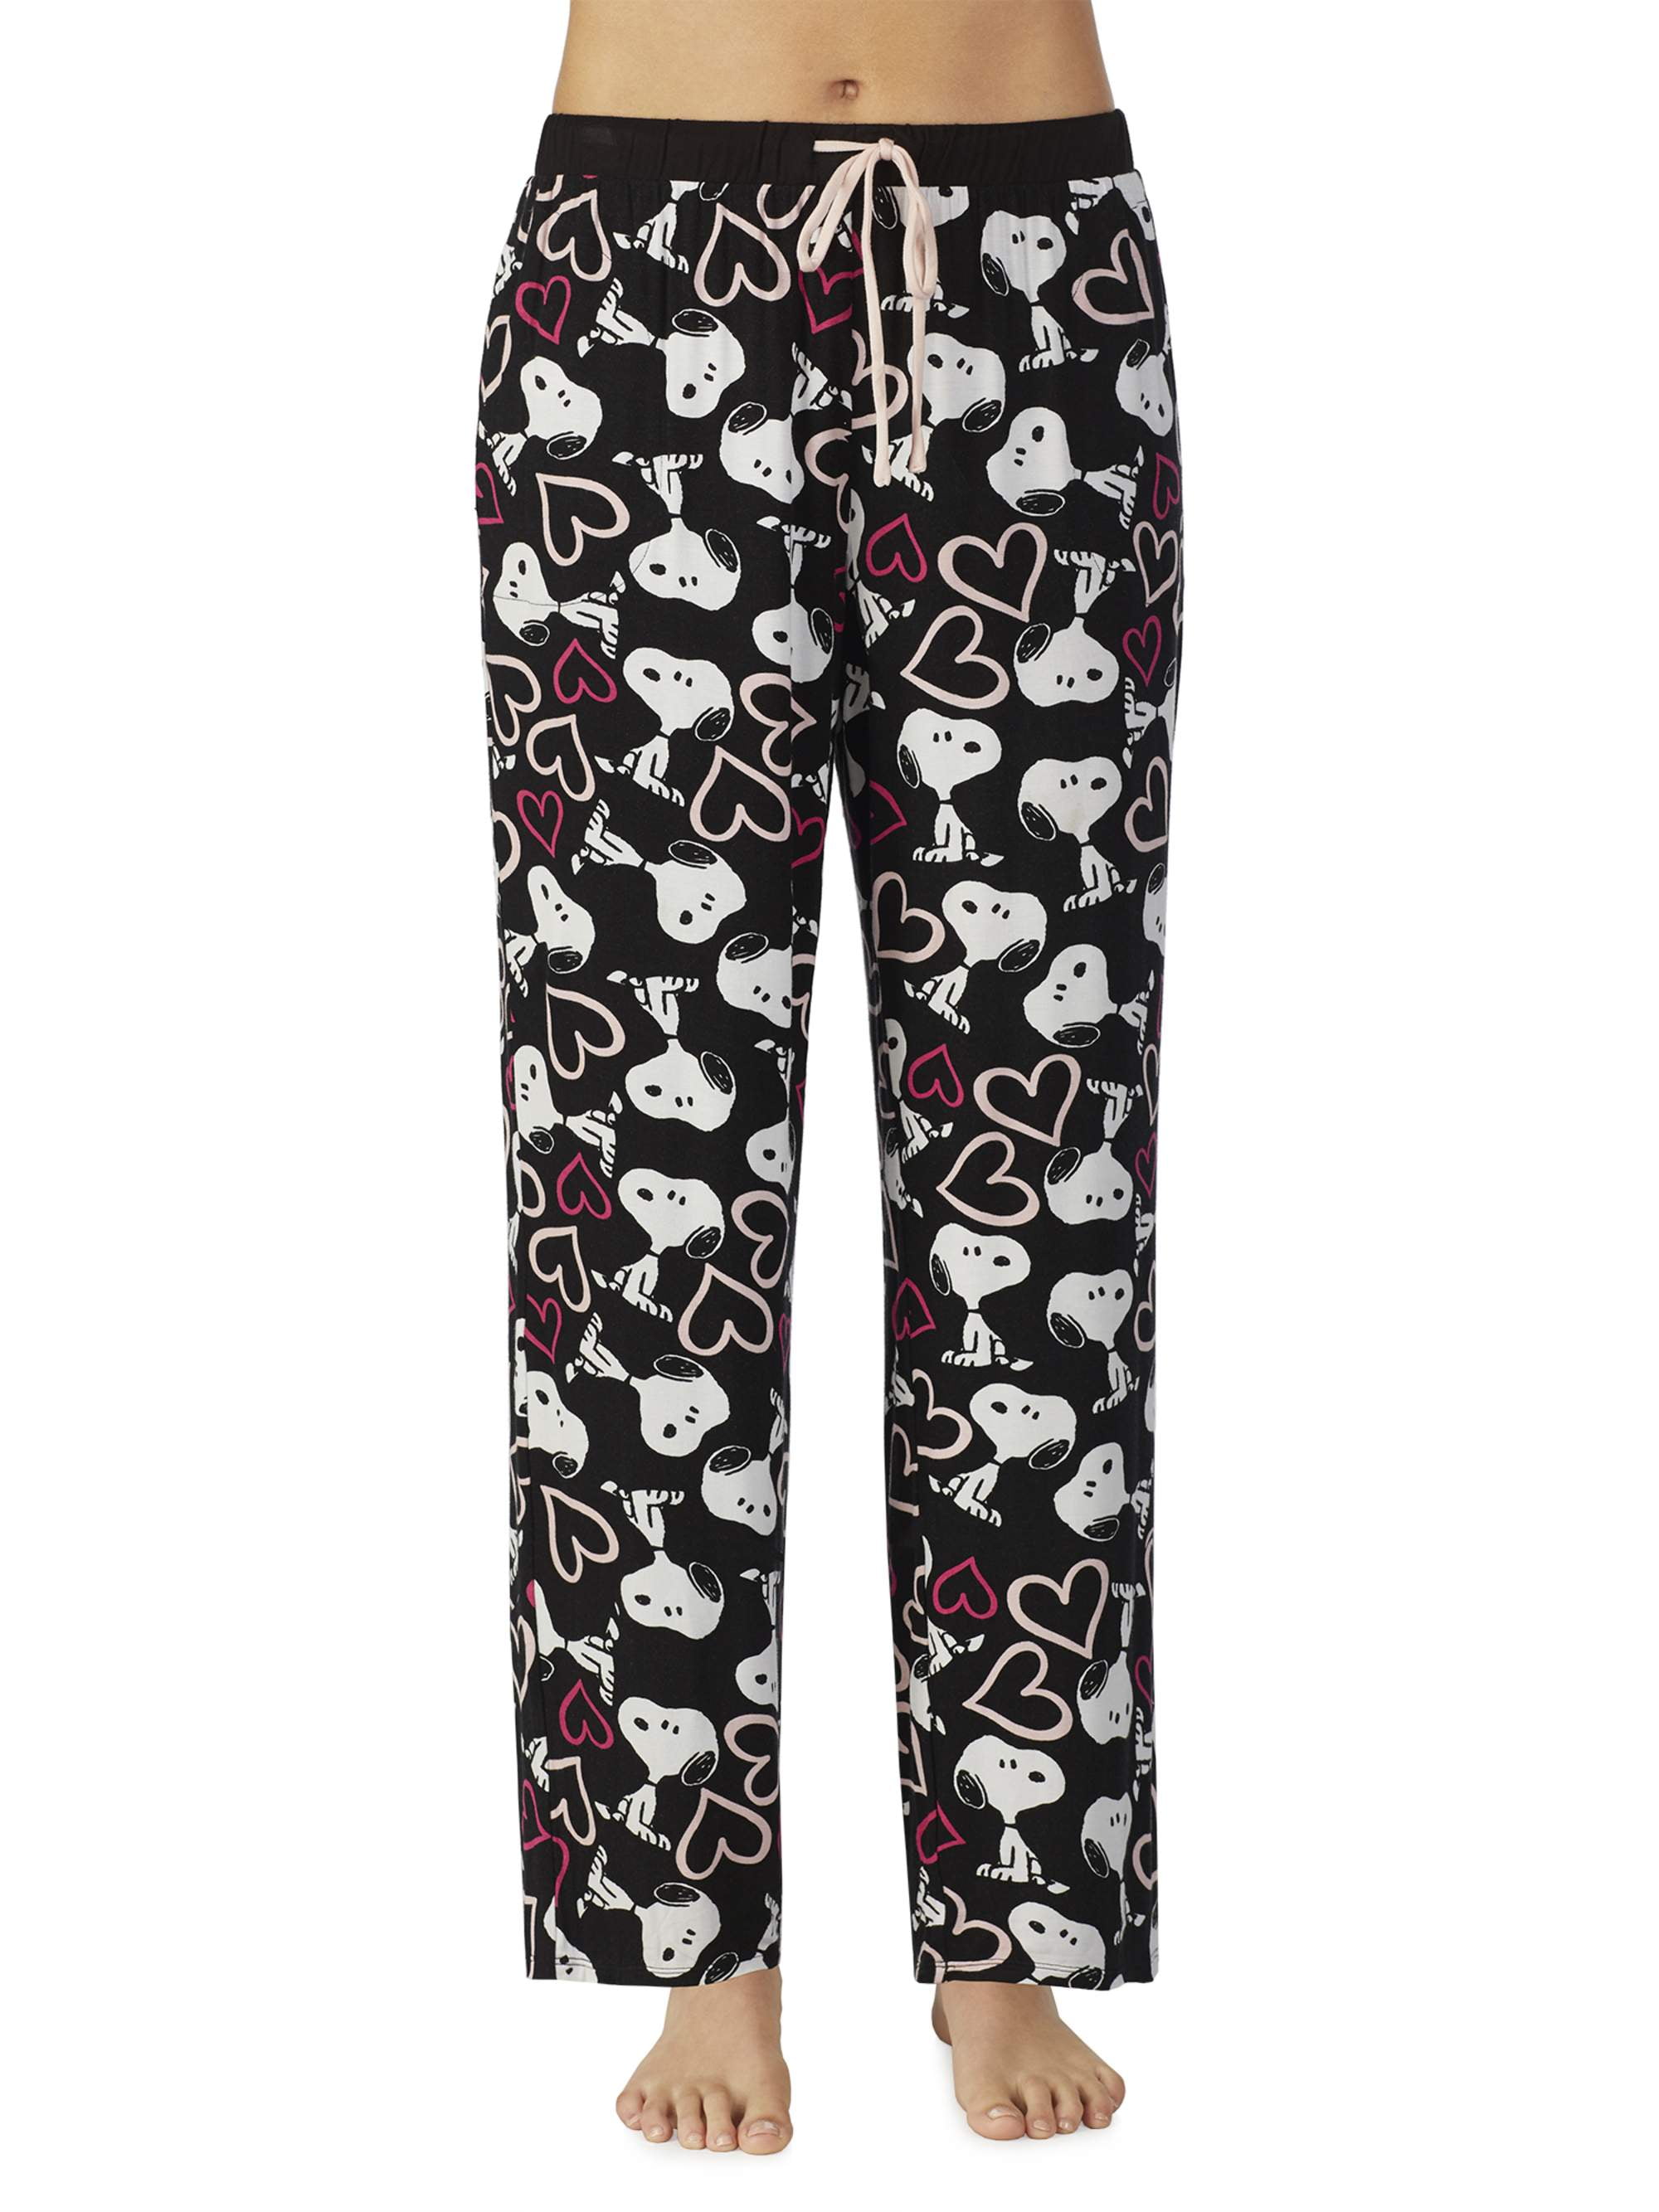 Peanuts Women's and Women's Plus Long Pant with Side Pockets - Walmart.com